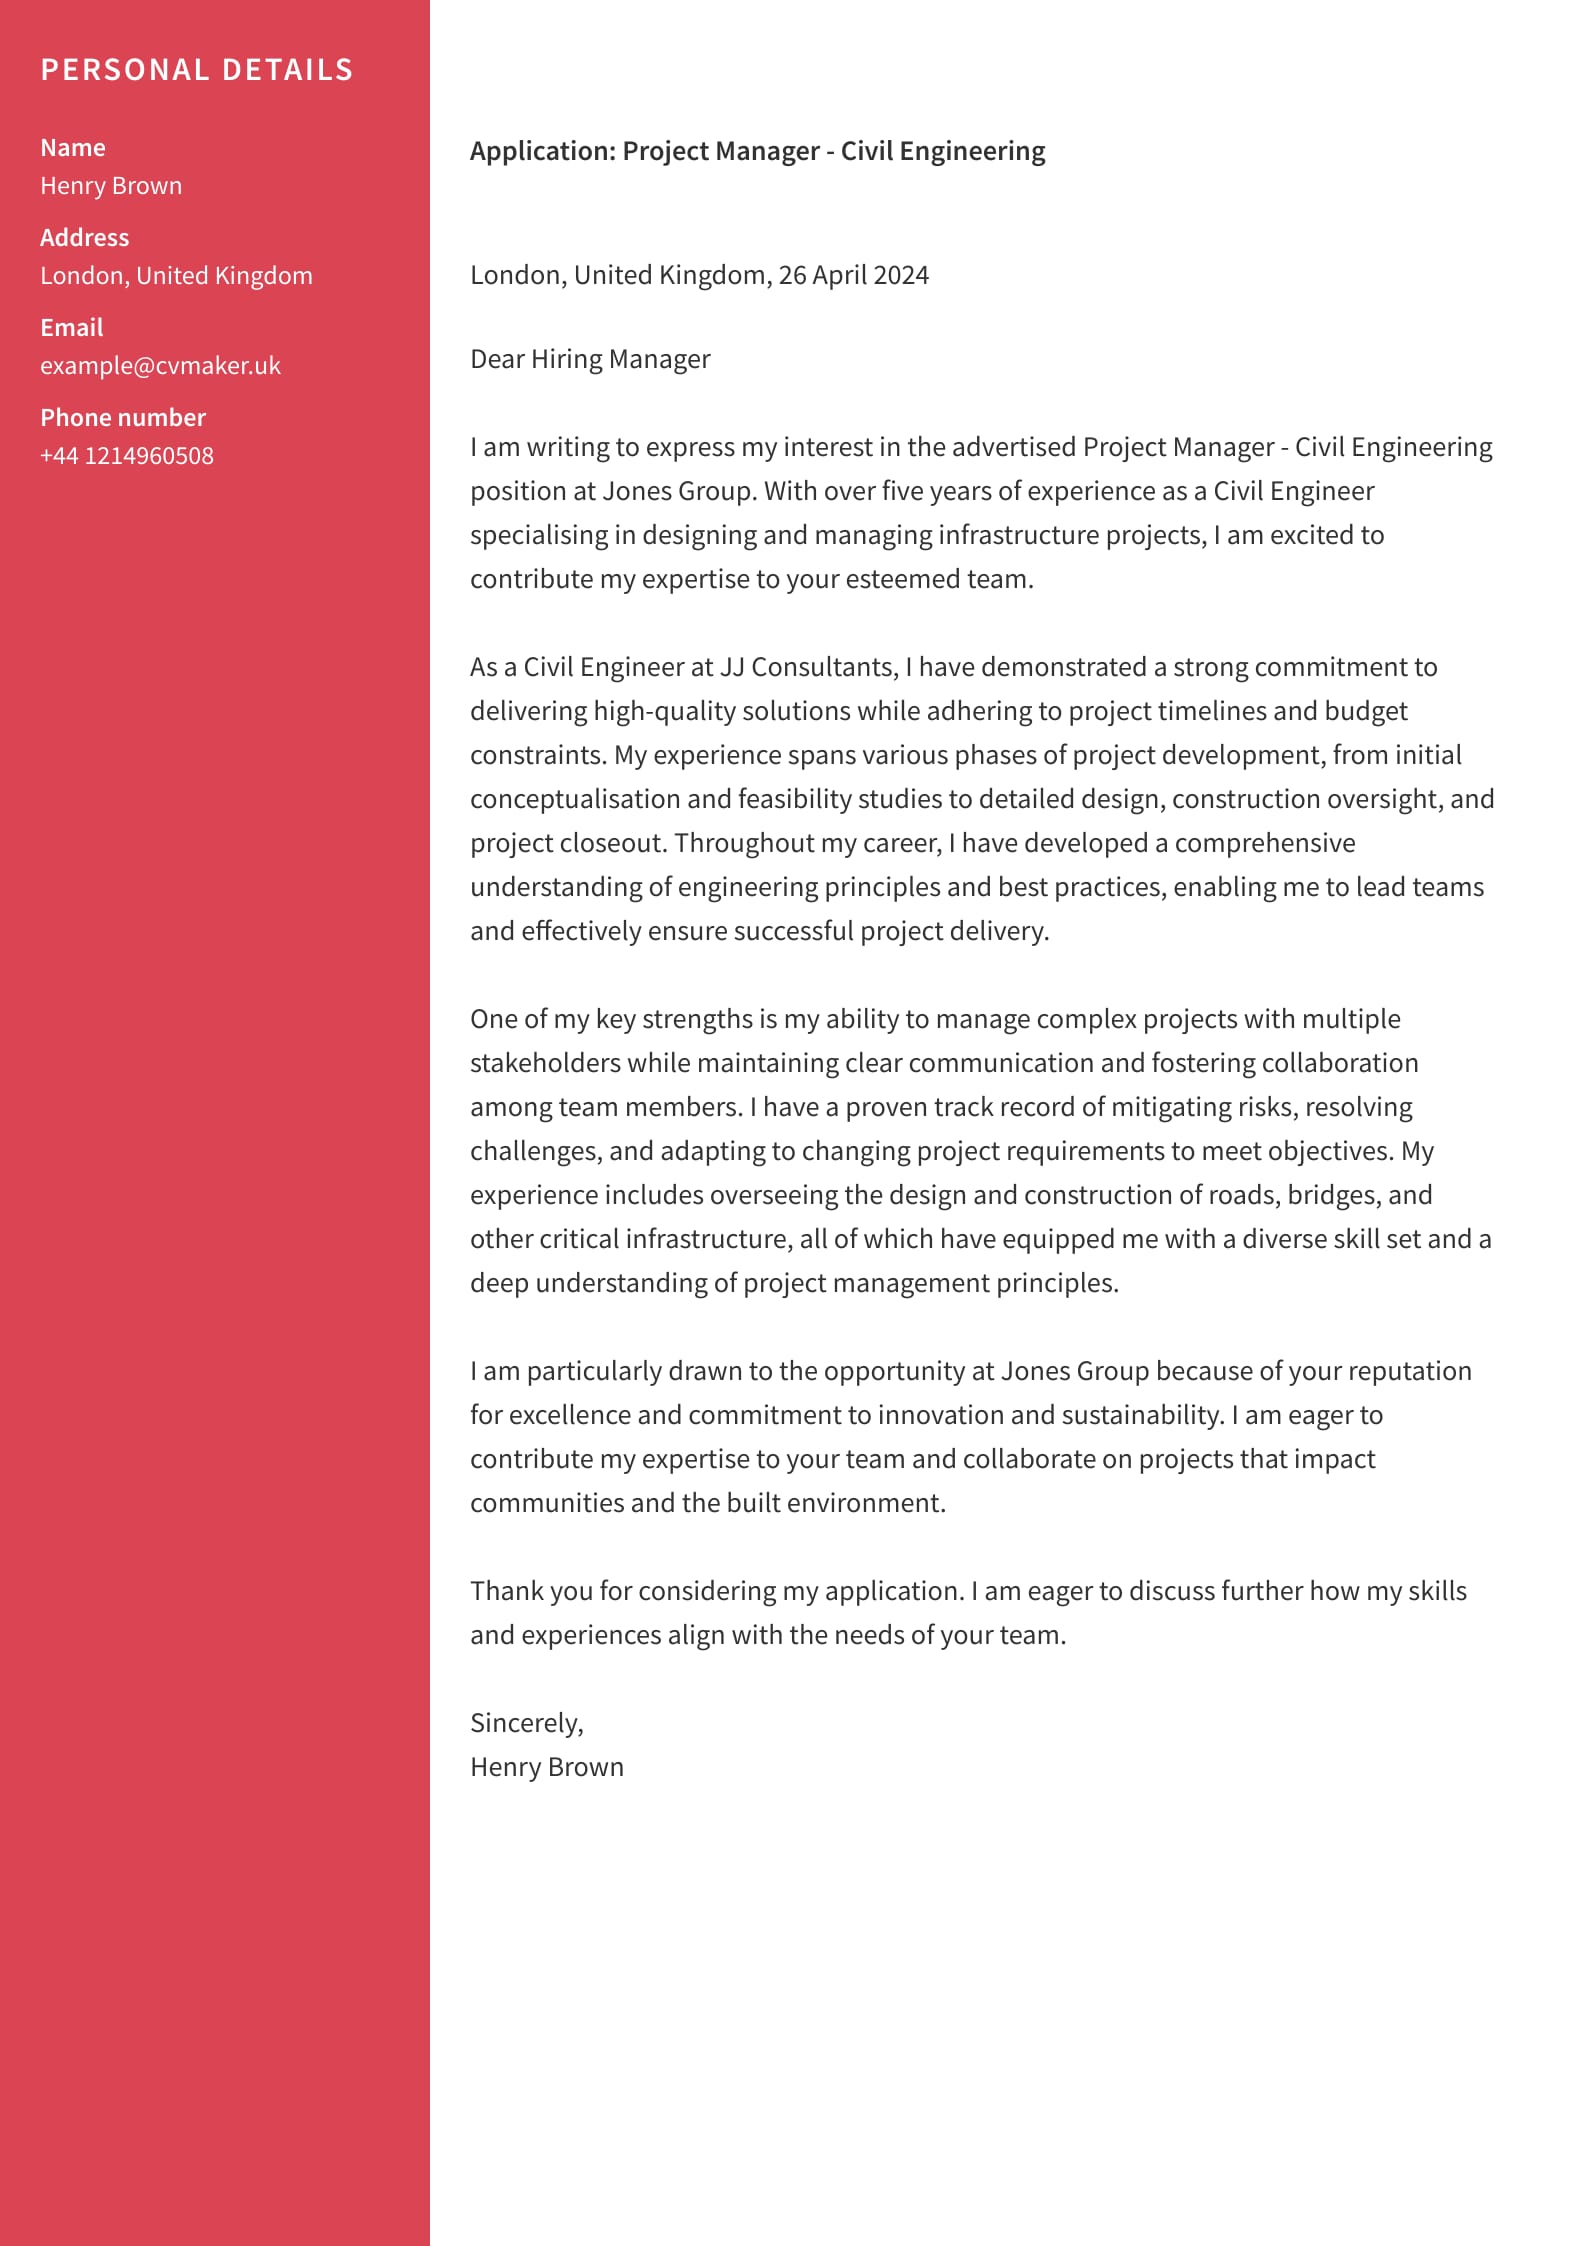 Cover Letter Example - Civil Engineer - Harvard template